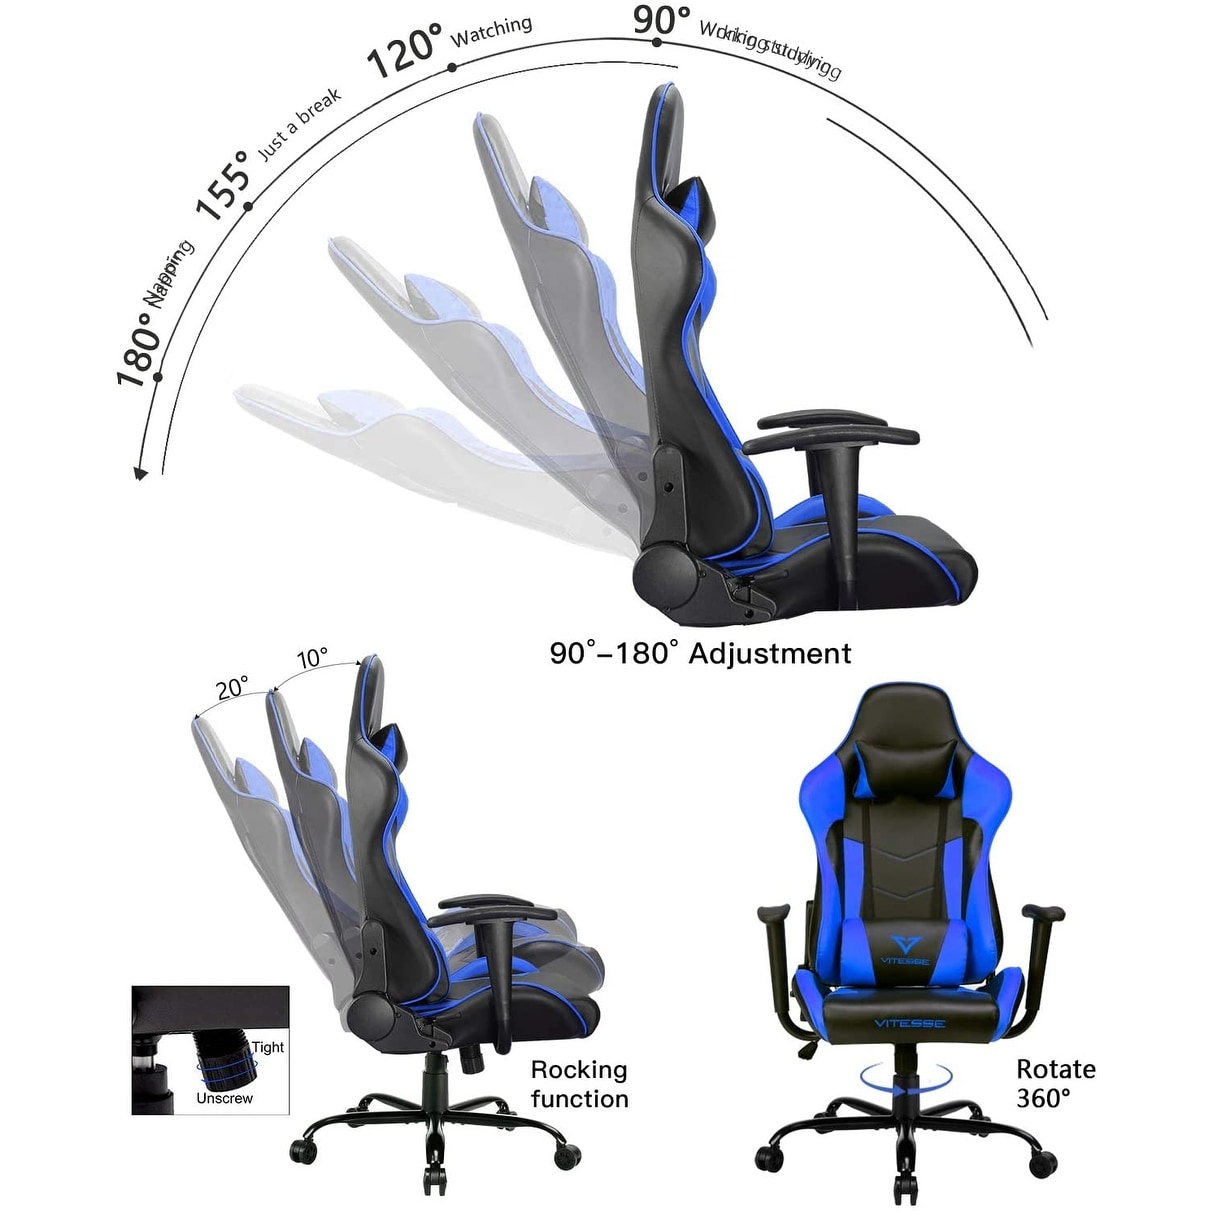 https://ak1.ostkcdn.com/images/products/is/images/direct/31bf184b480df958a0e1415906ec6fbab4dcabe3/Bossin-Gaming-Chair-Adjustable-Swivel-Chair-with-Lumbar-Support-and-Headrest.jpg